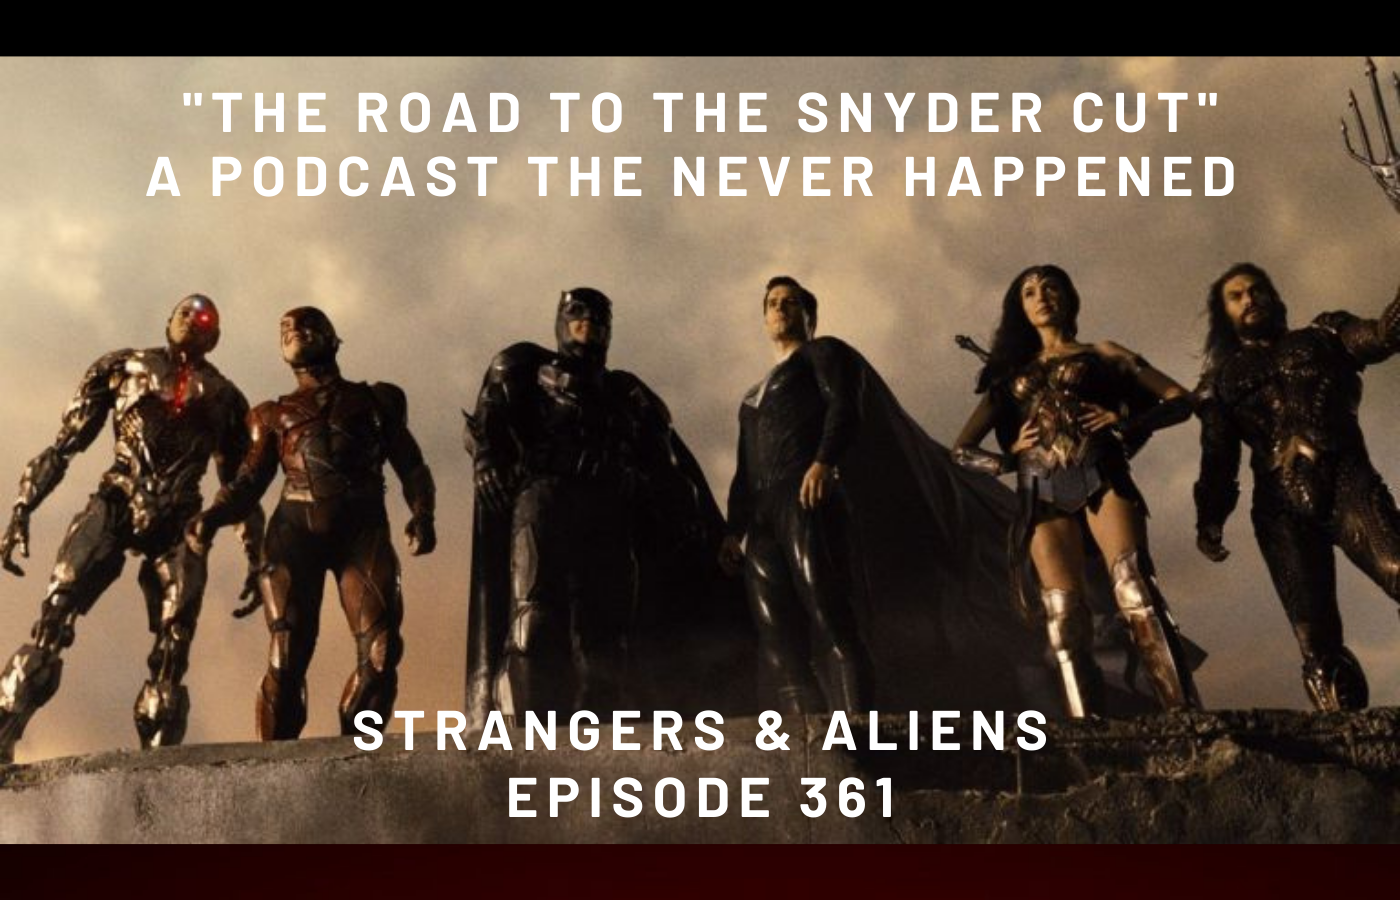 THE ROAD TO THE SNYDER CUT (or “Welcome to the Snyder Cut”, a podcast that never happened) – SA361